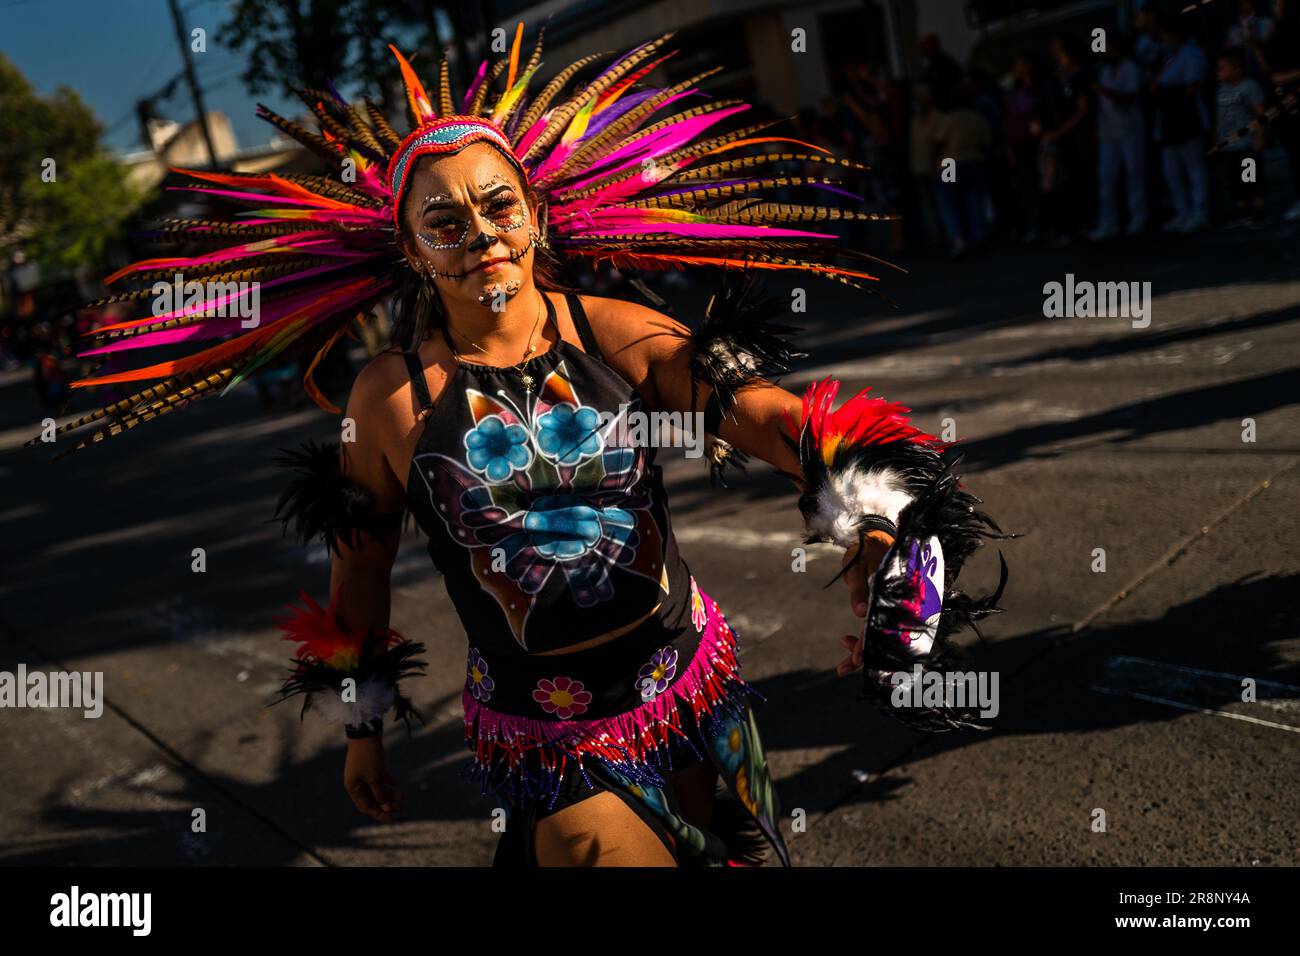 A young Mexican woman, wearing an Aztec feather headdress, performs a dance act during the Day of the Dead festivities in Guadalajara, Jalisco, Mexico. Stock Photo